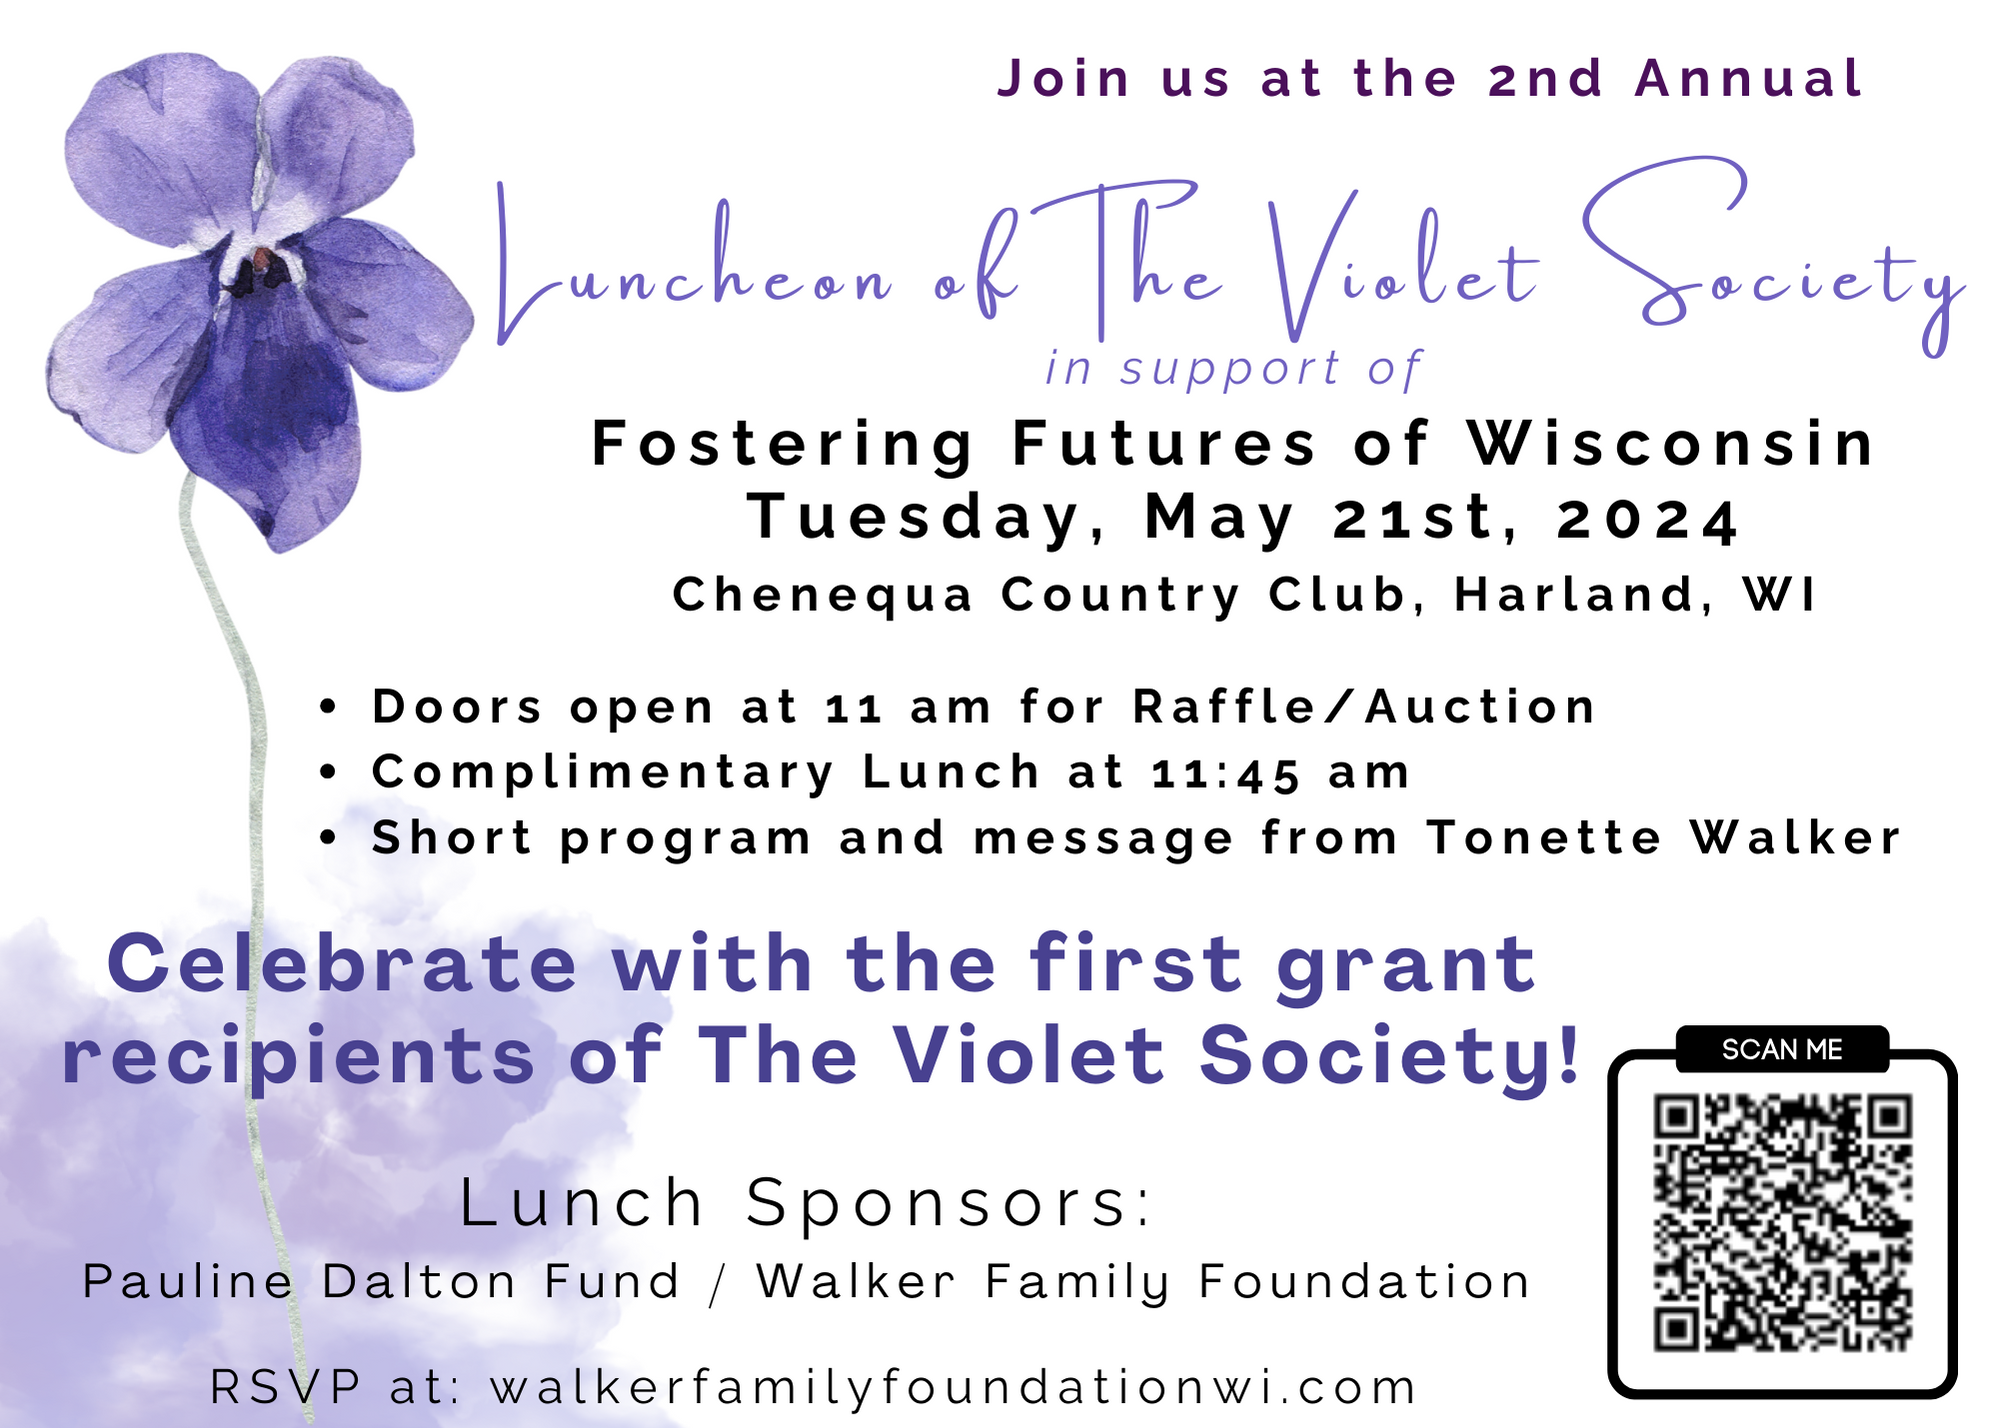 Violet Society Luncheon invite for 2024